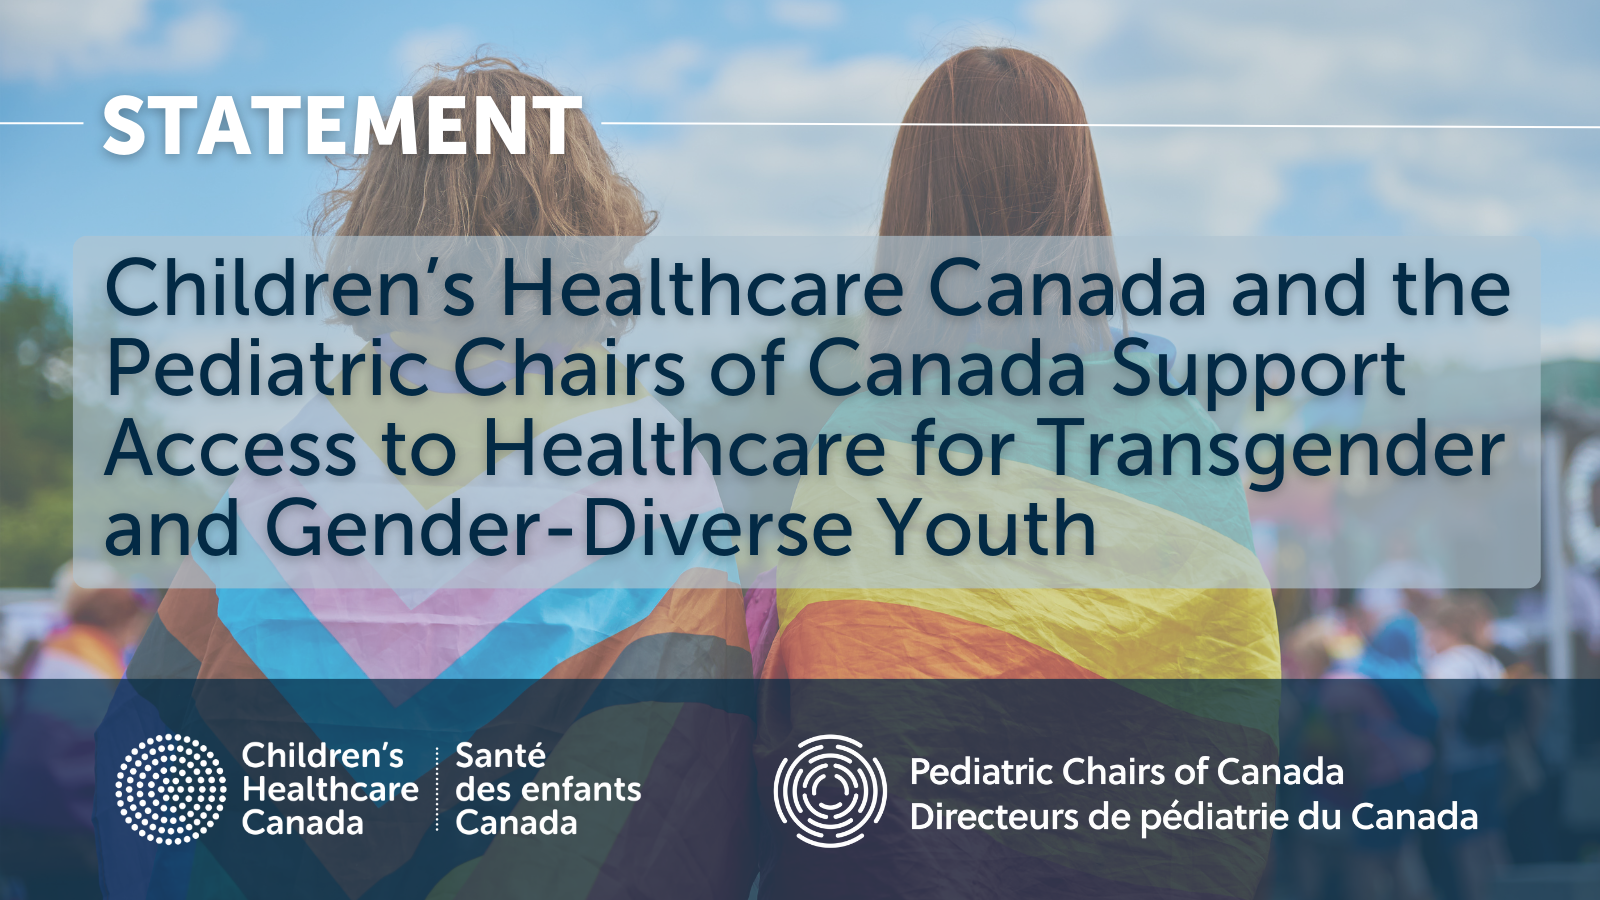 Children's Healthcare Canada Statement graphic on Access to Healthcare for Transgender and Gender-Diverse Youth